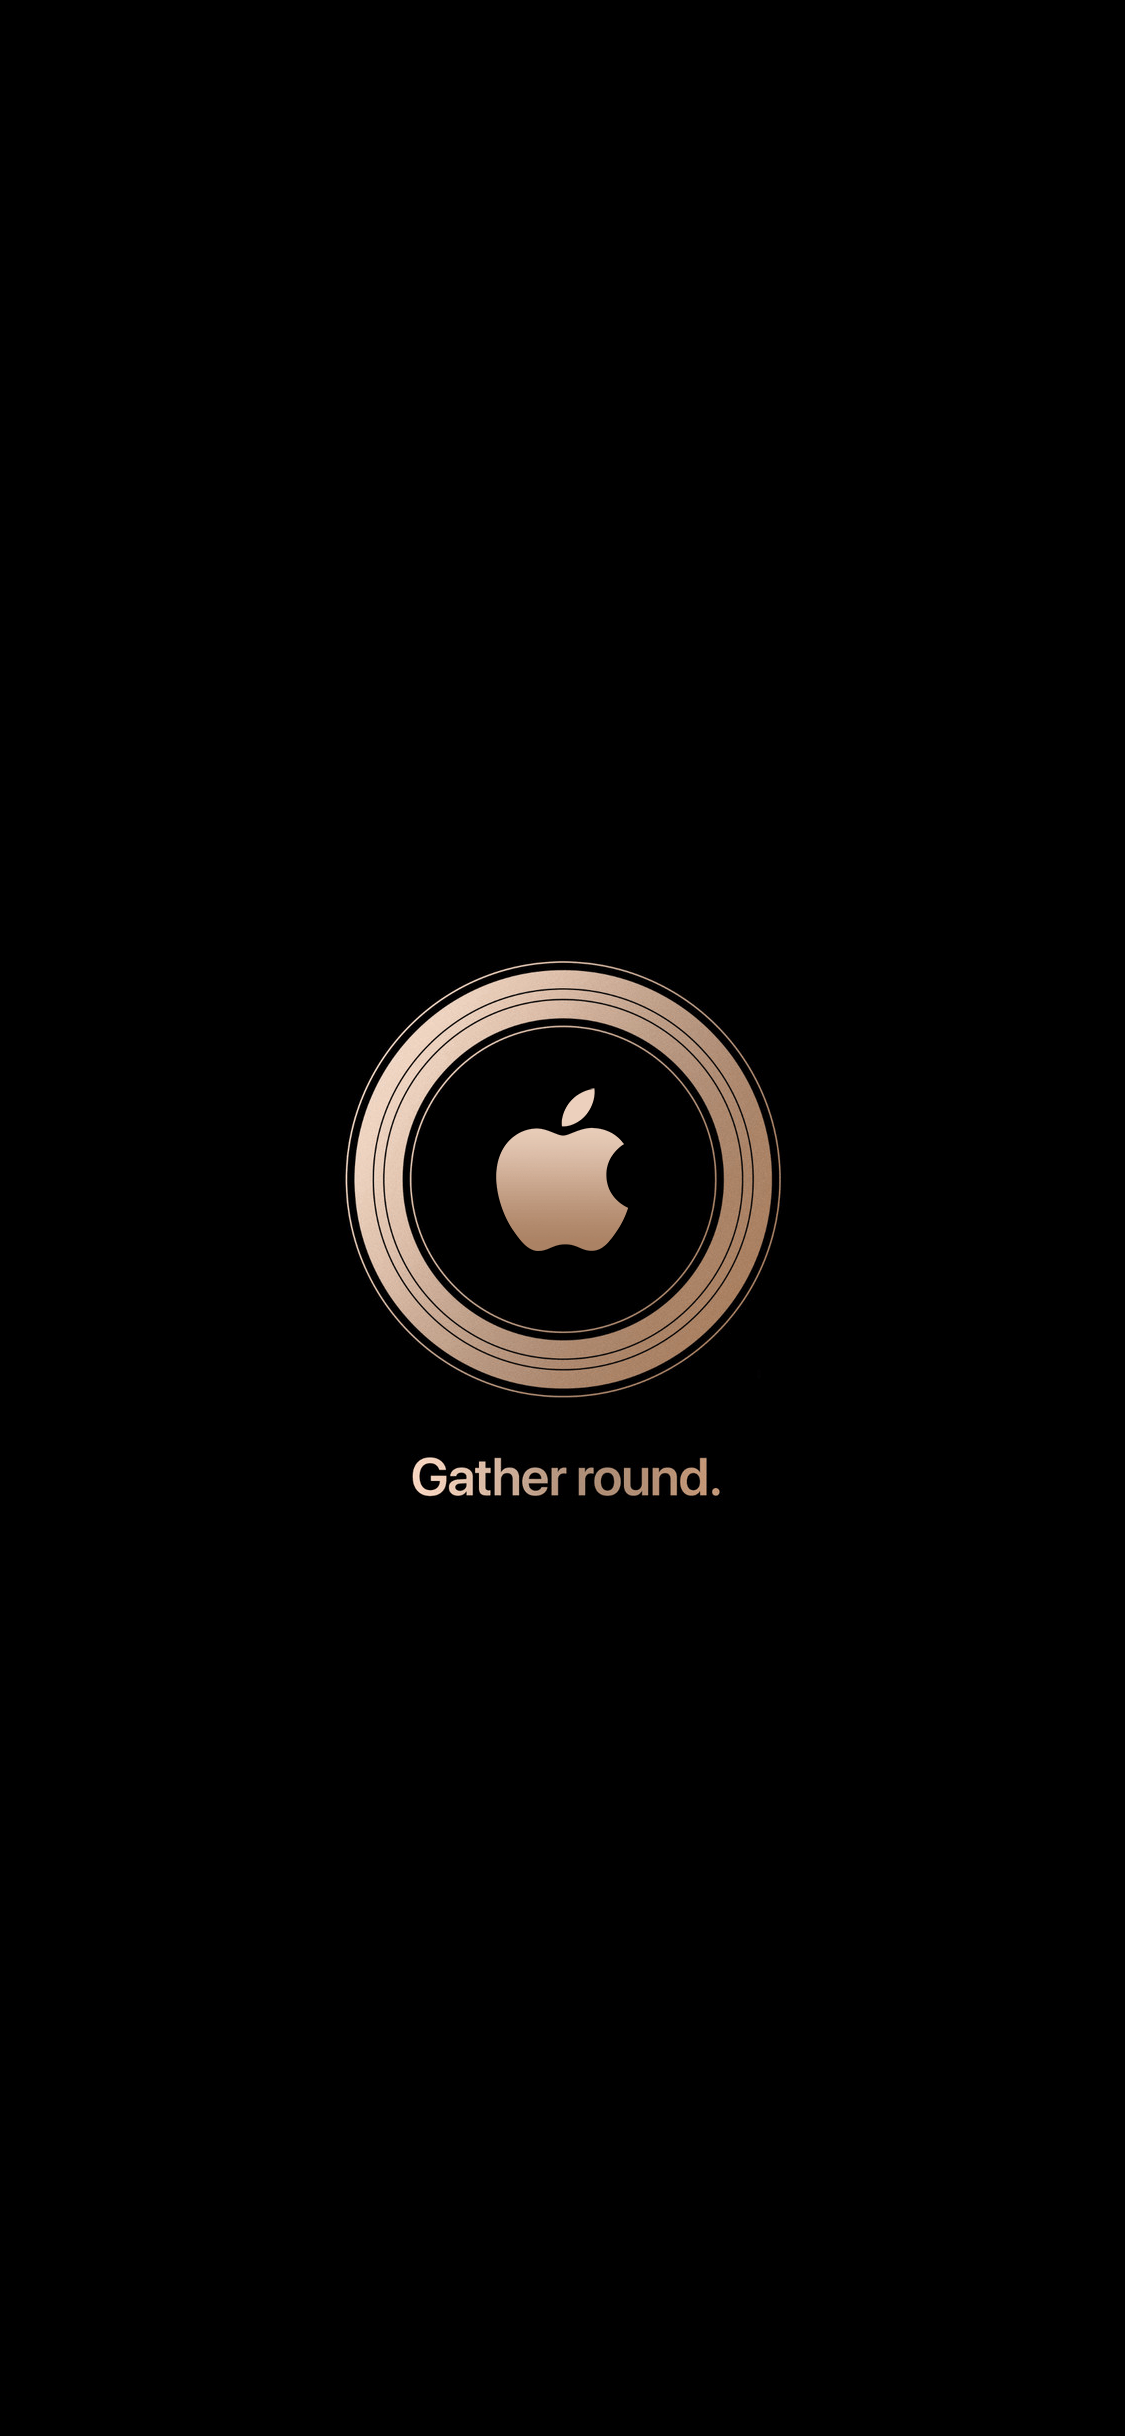 iPhone X Logo - Gather round Apple event wallpapers